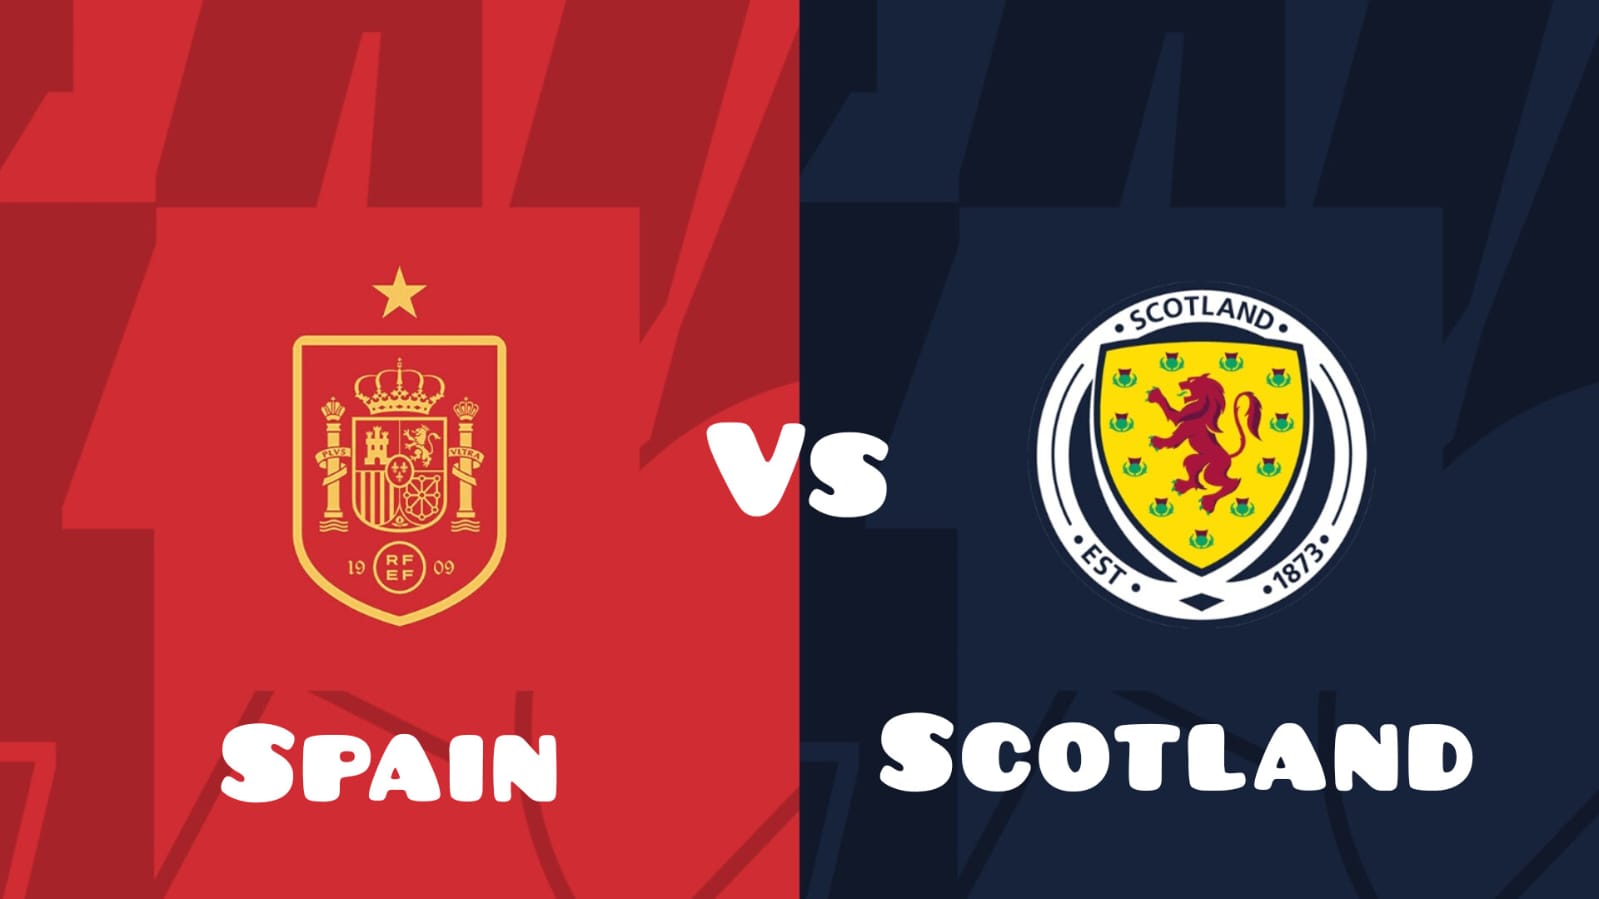 Spain vs Scotland: Live Score, Lineups, and Highlights